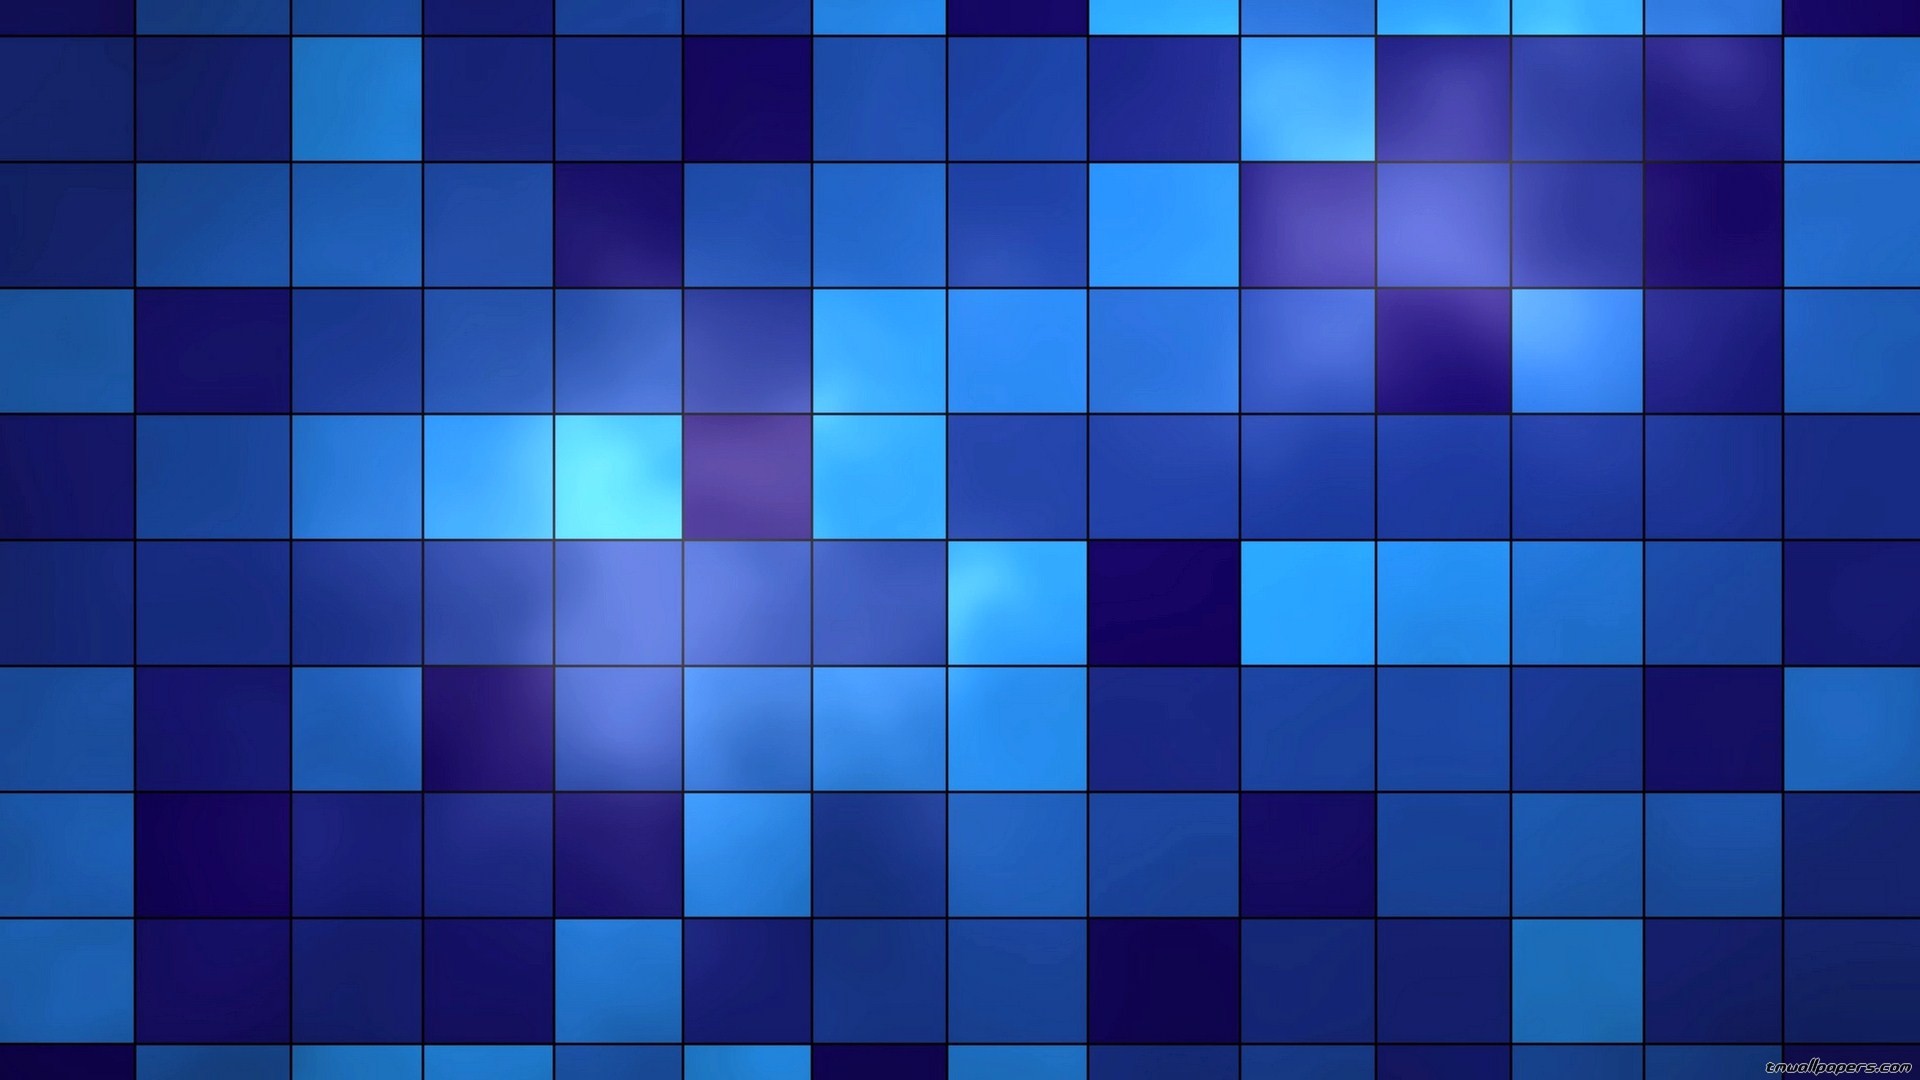 Blue abstract wide wallpapers 1280×800 1440×900 1680×1050 1920×1200